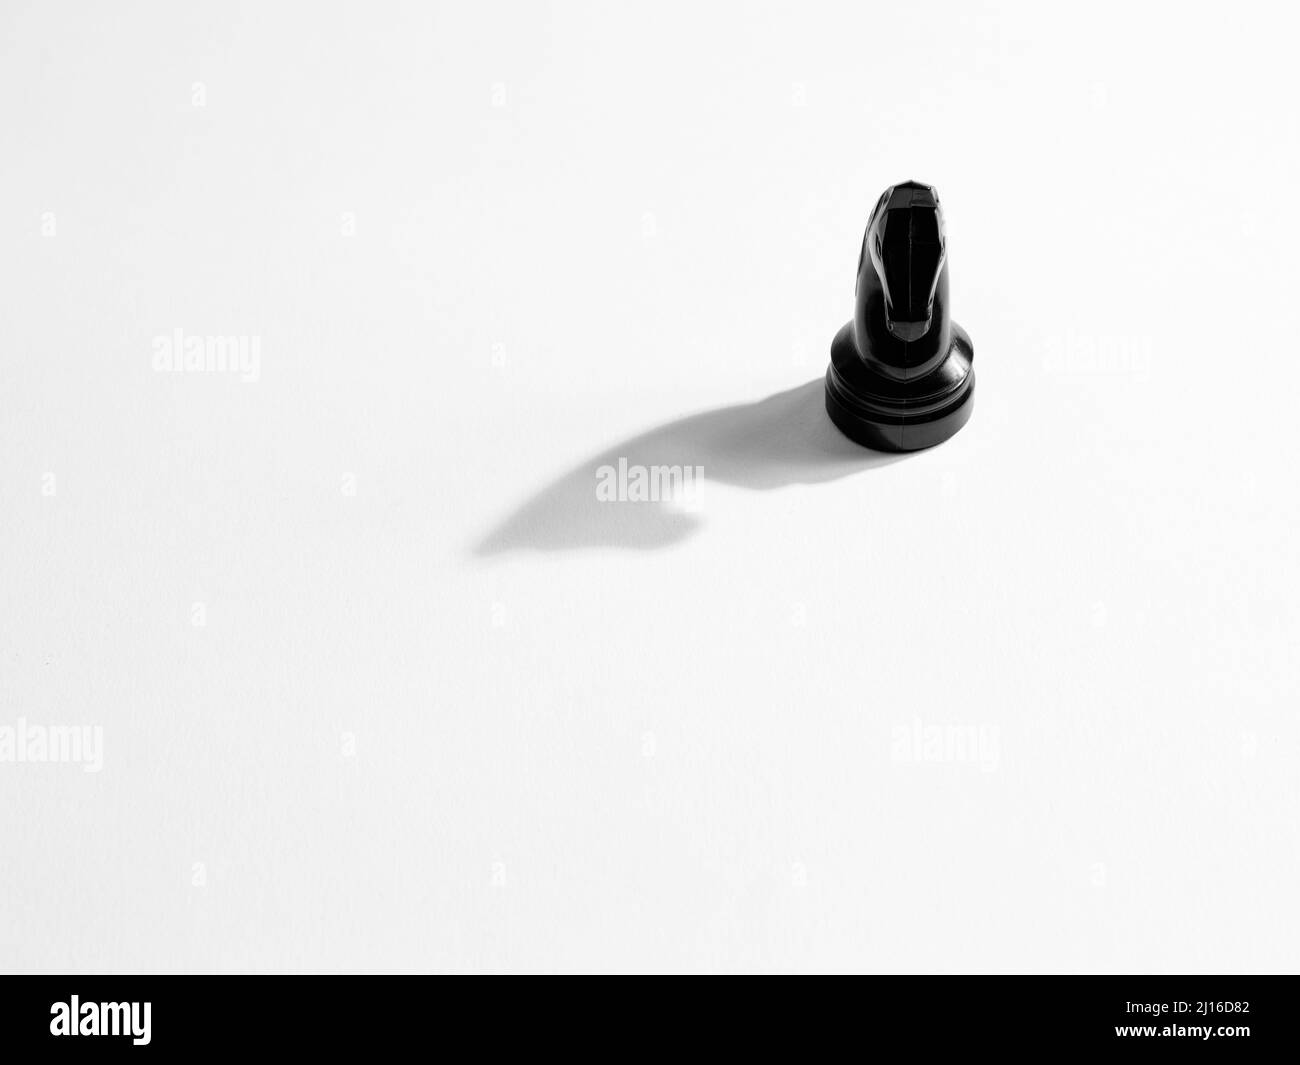 Knight or horse chess piece on white background with shadow. Stock Photo